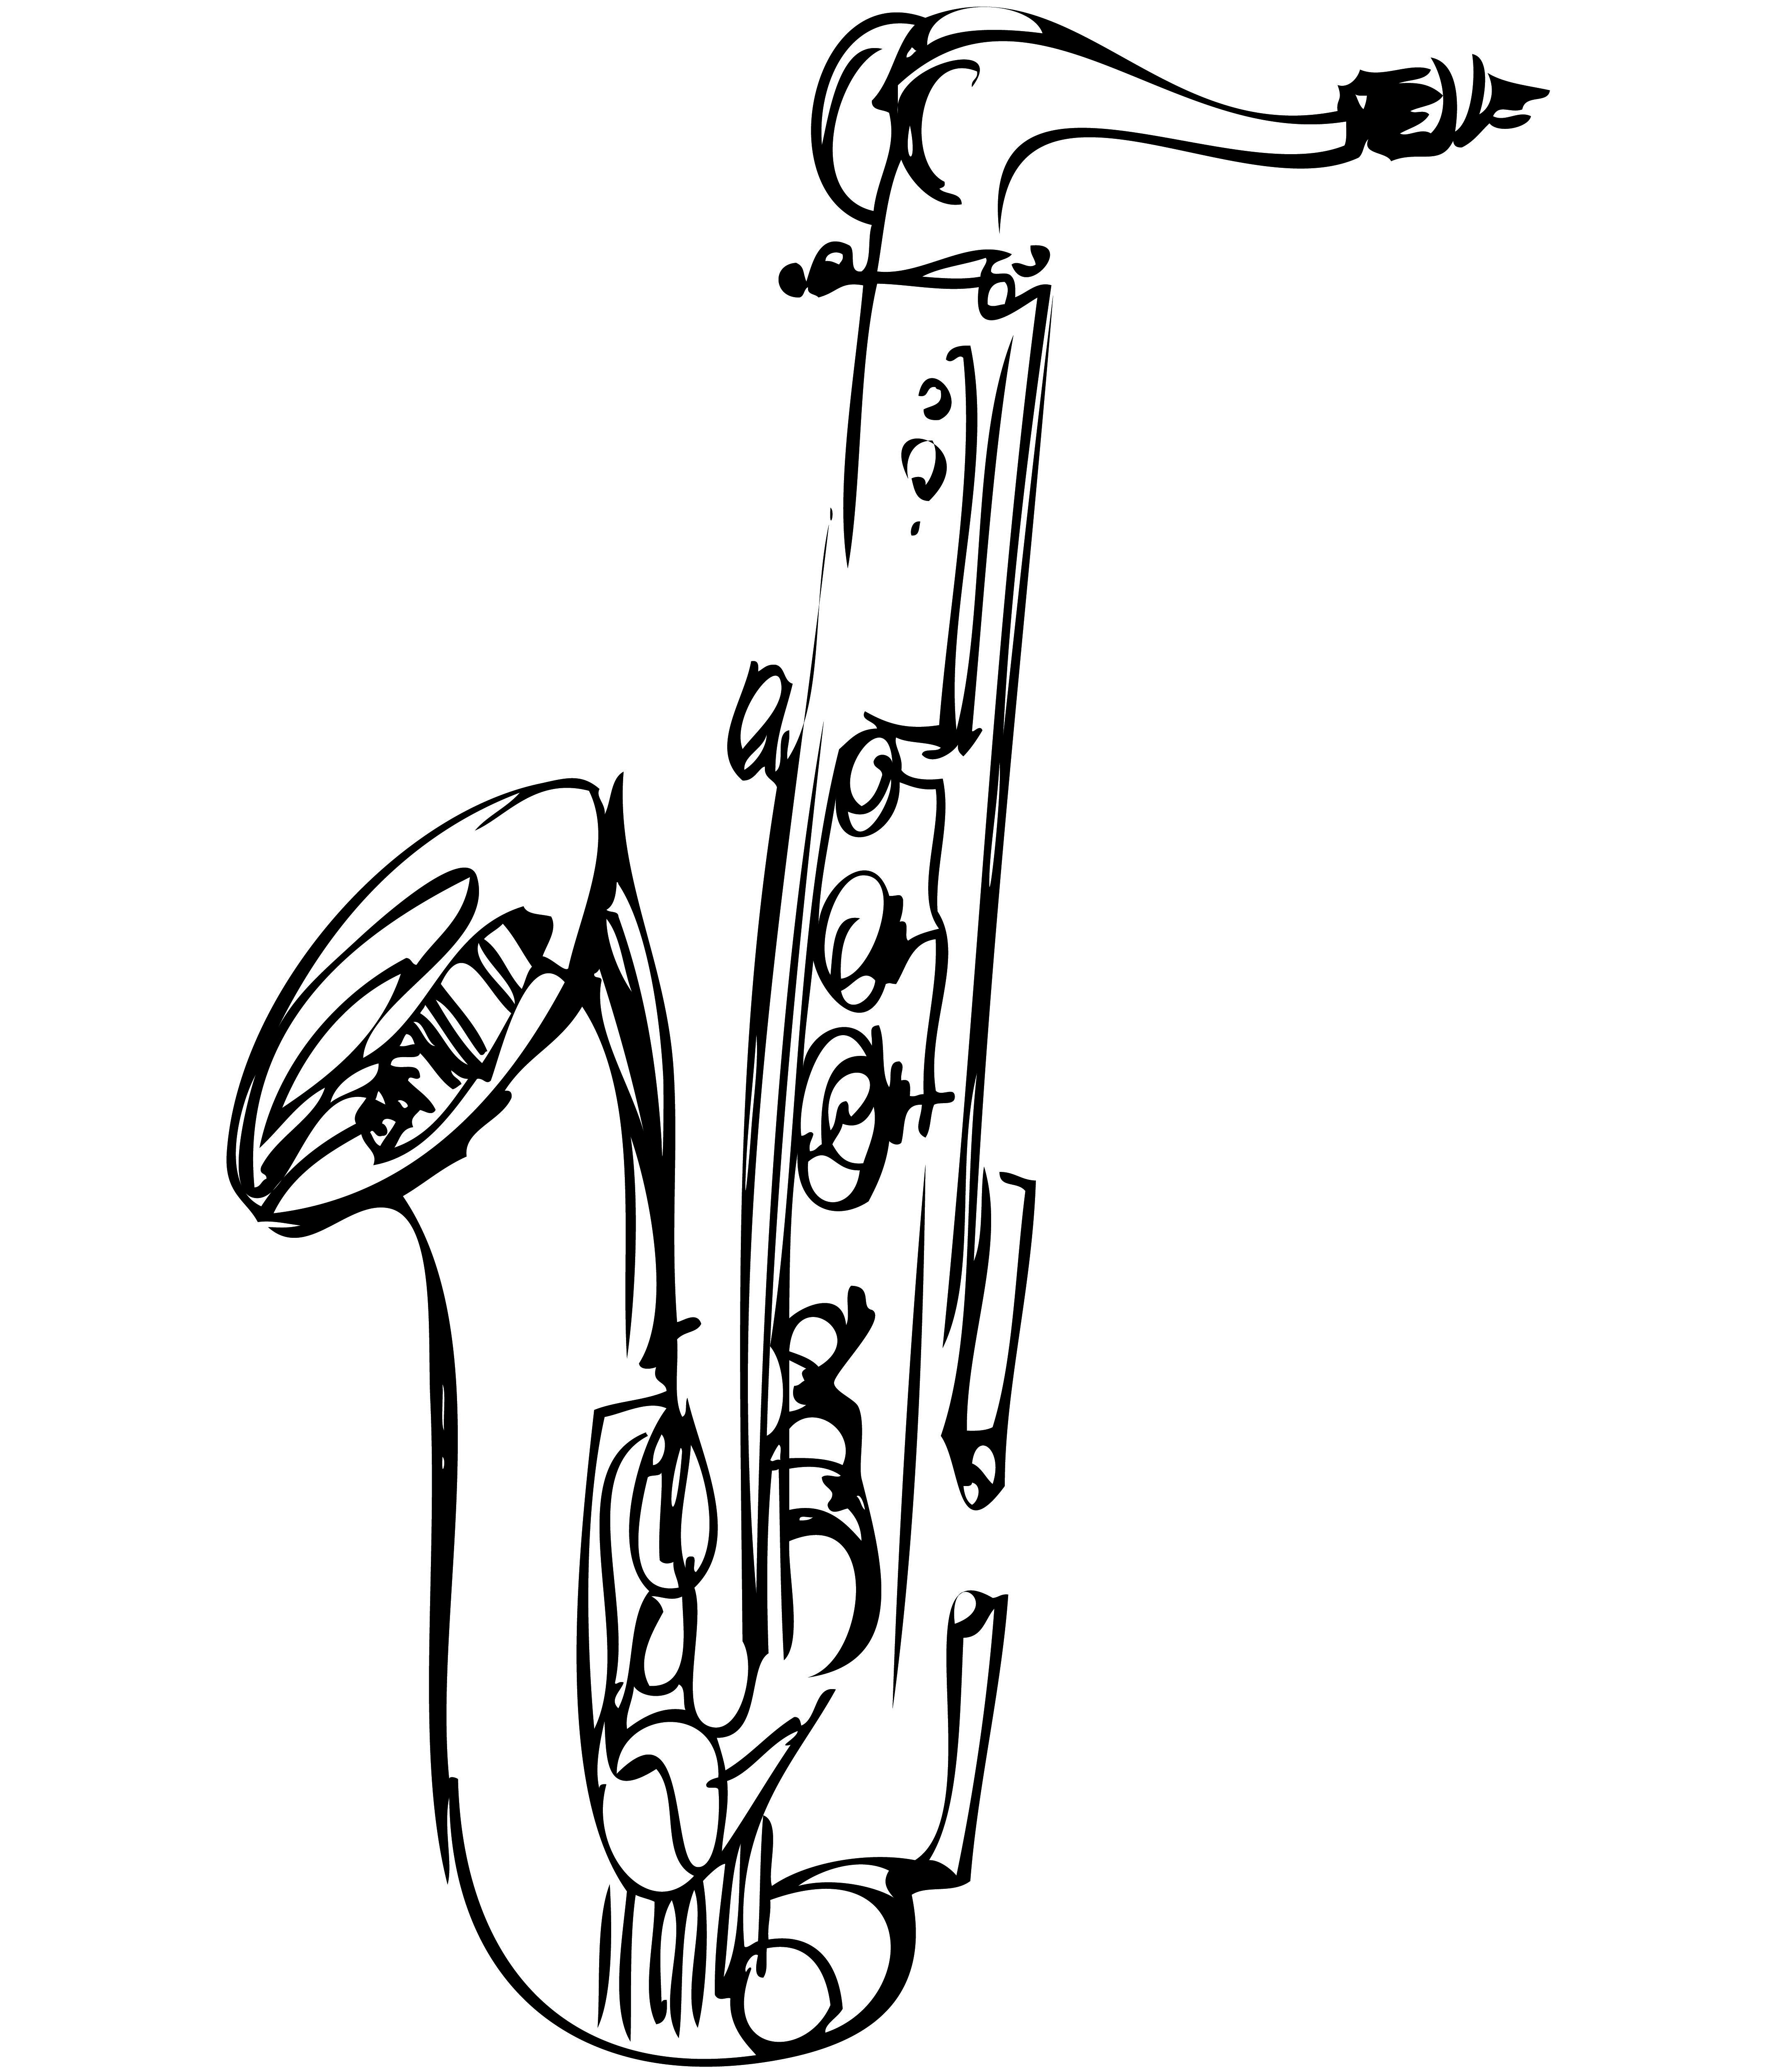 Saxophone Drawing - ClipArt Best